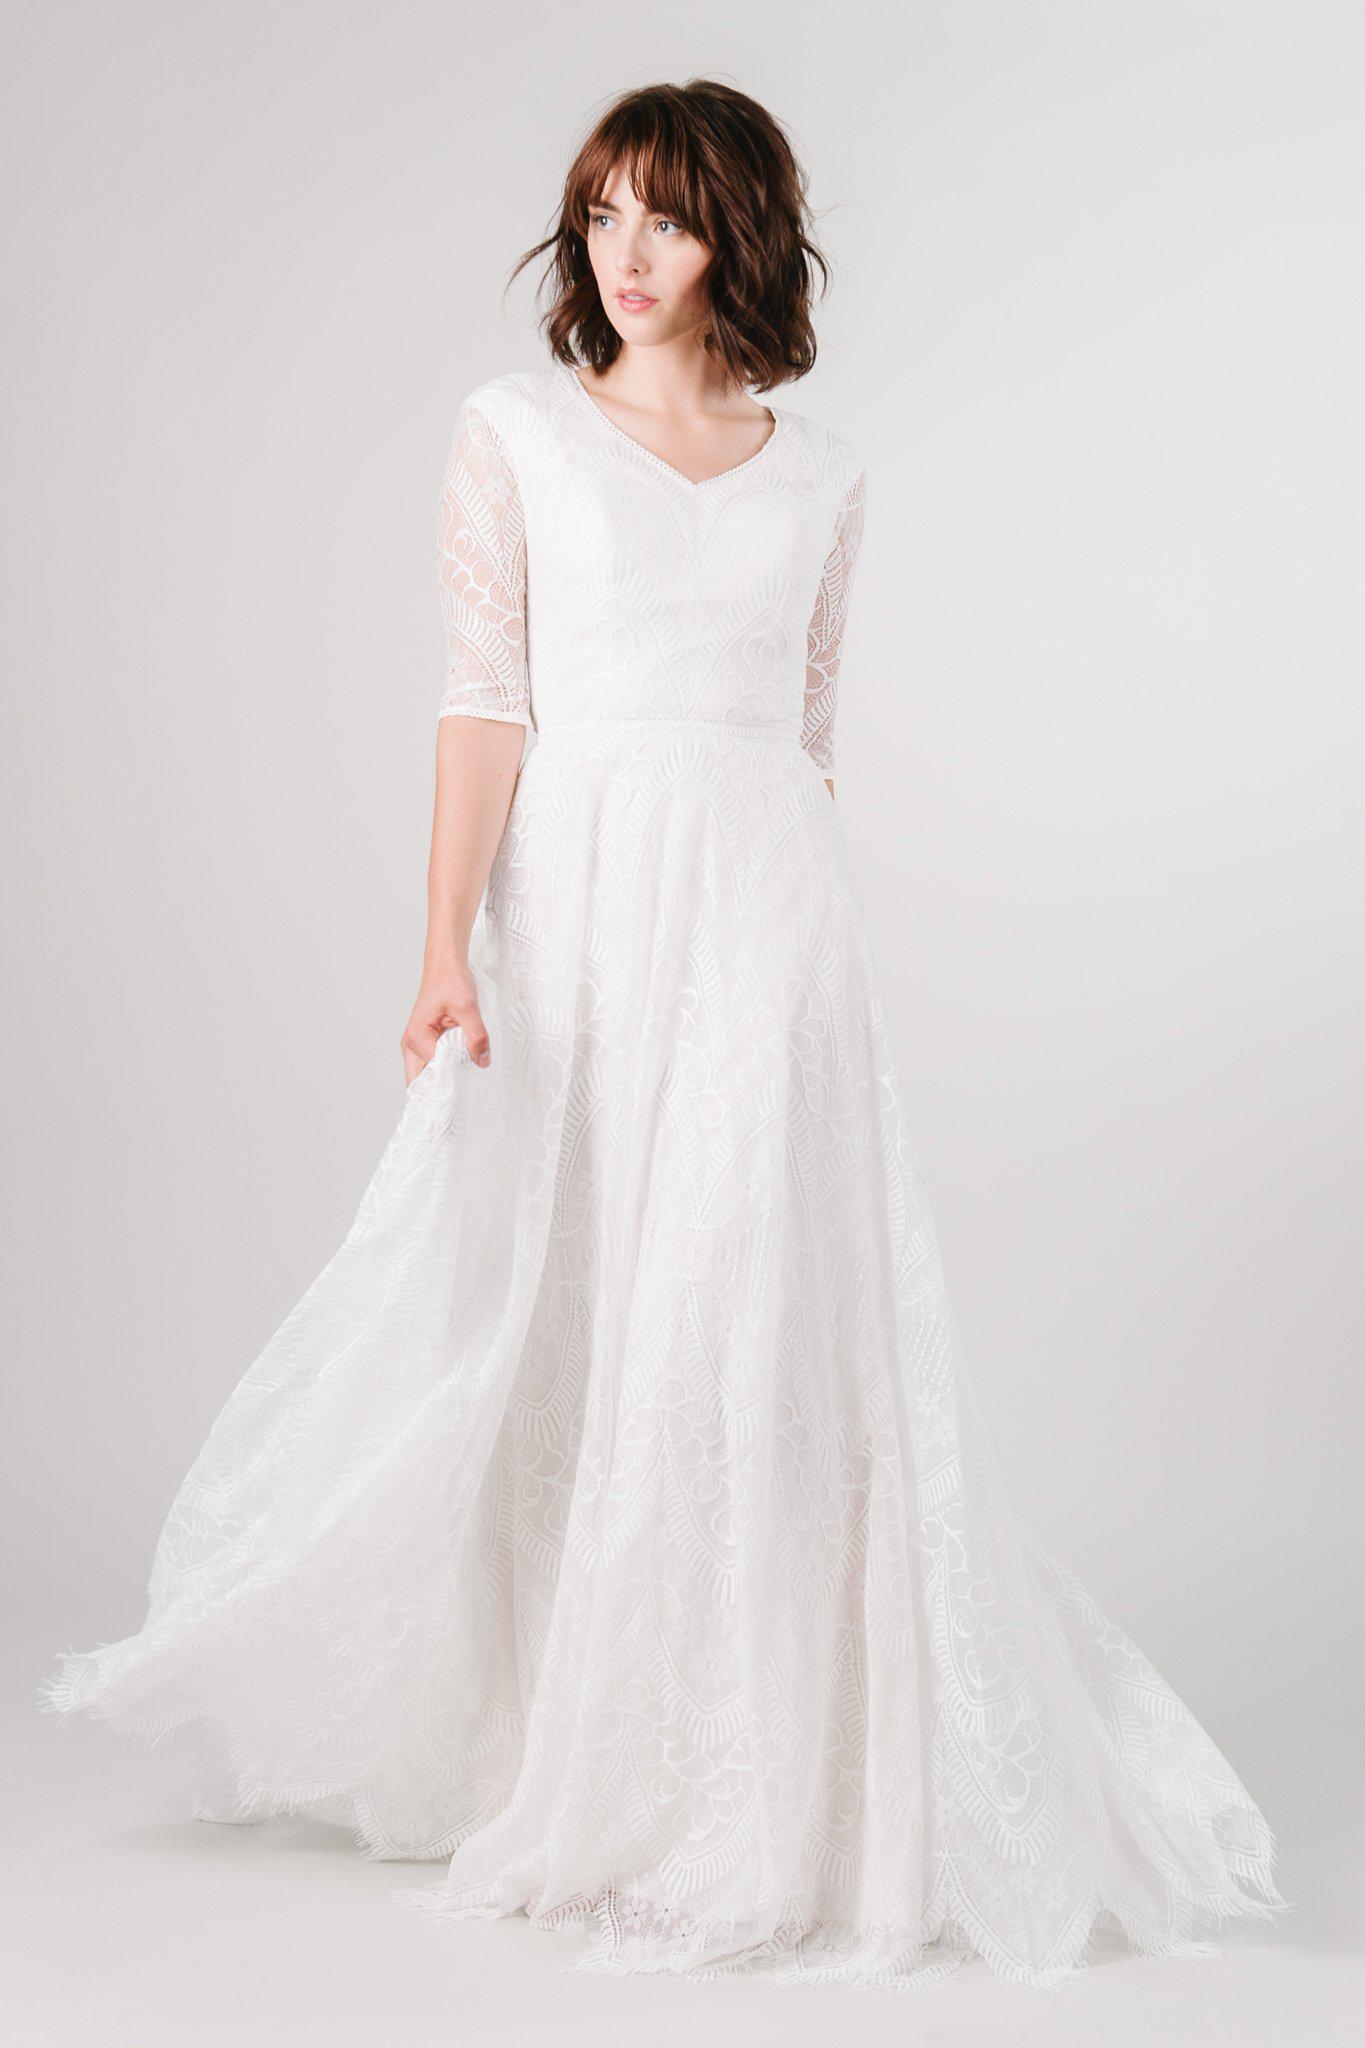 Modest lace wedding dress with long sleeves from LatterDayBride, a bridal shop in Downtown Salt Lake City, Utah. 